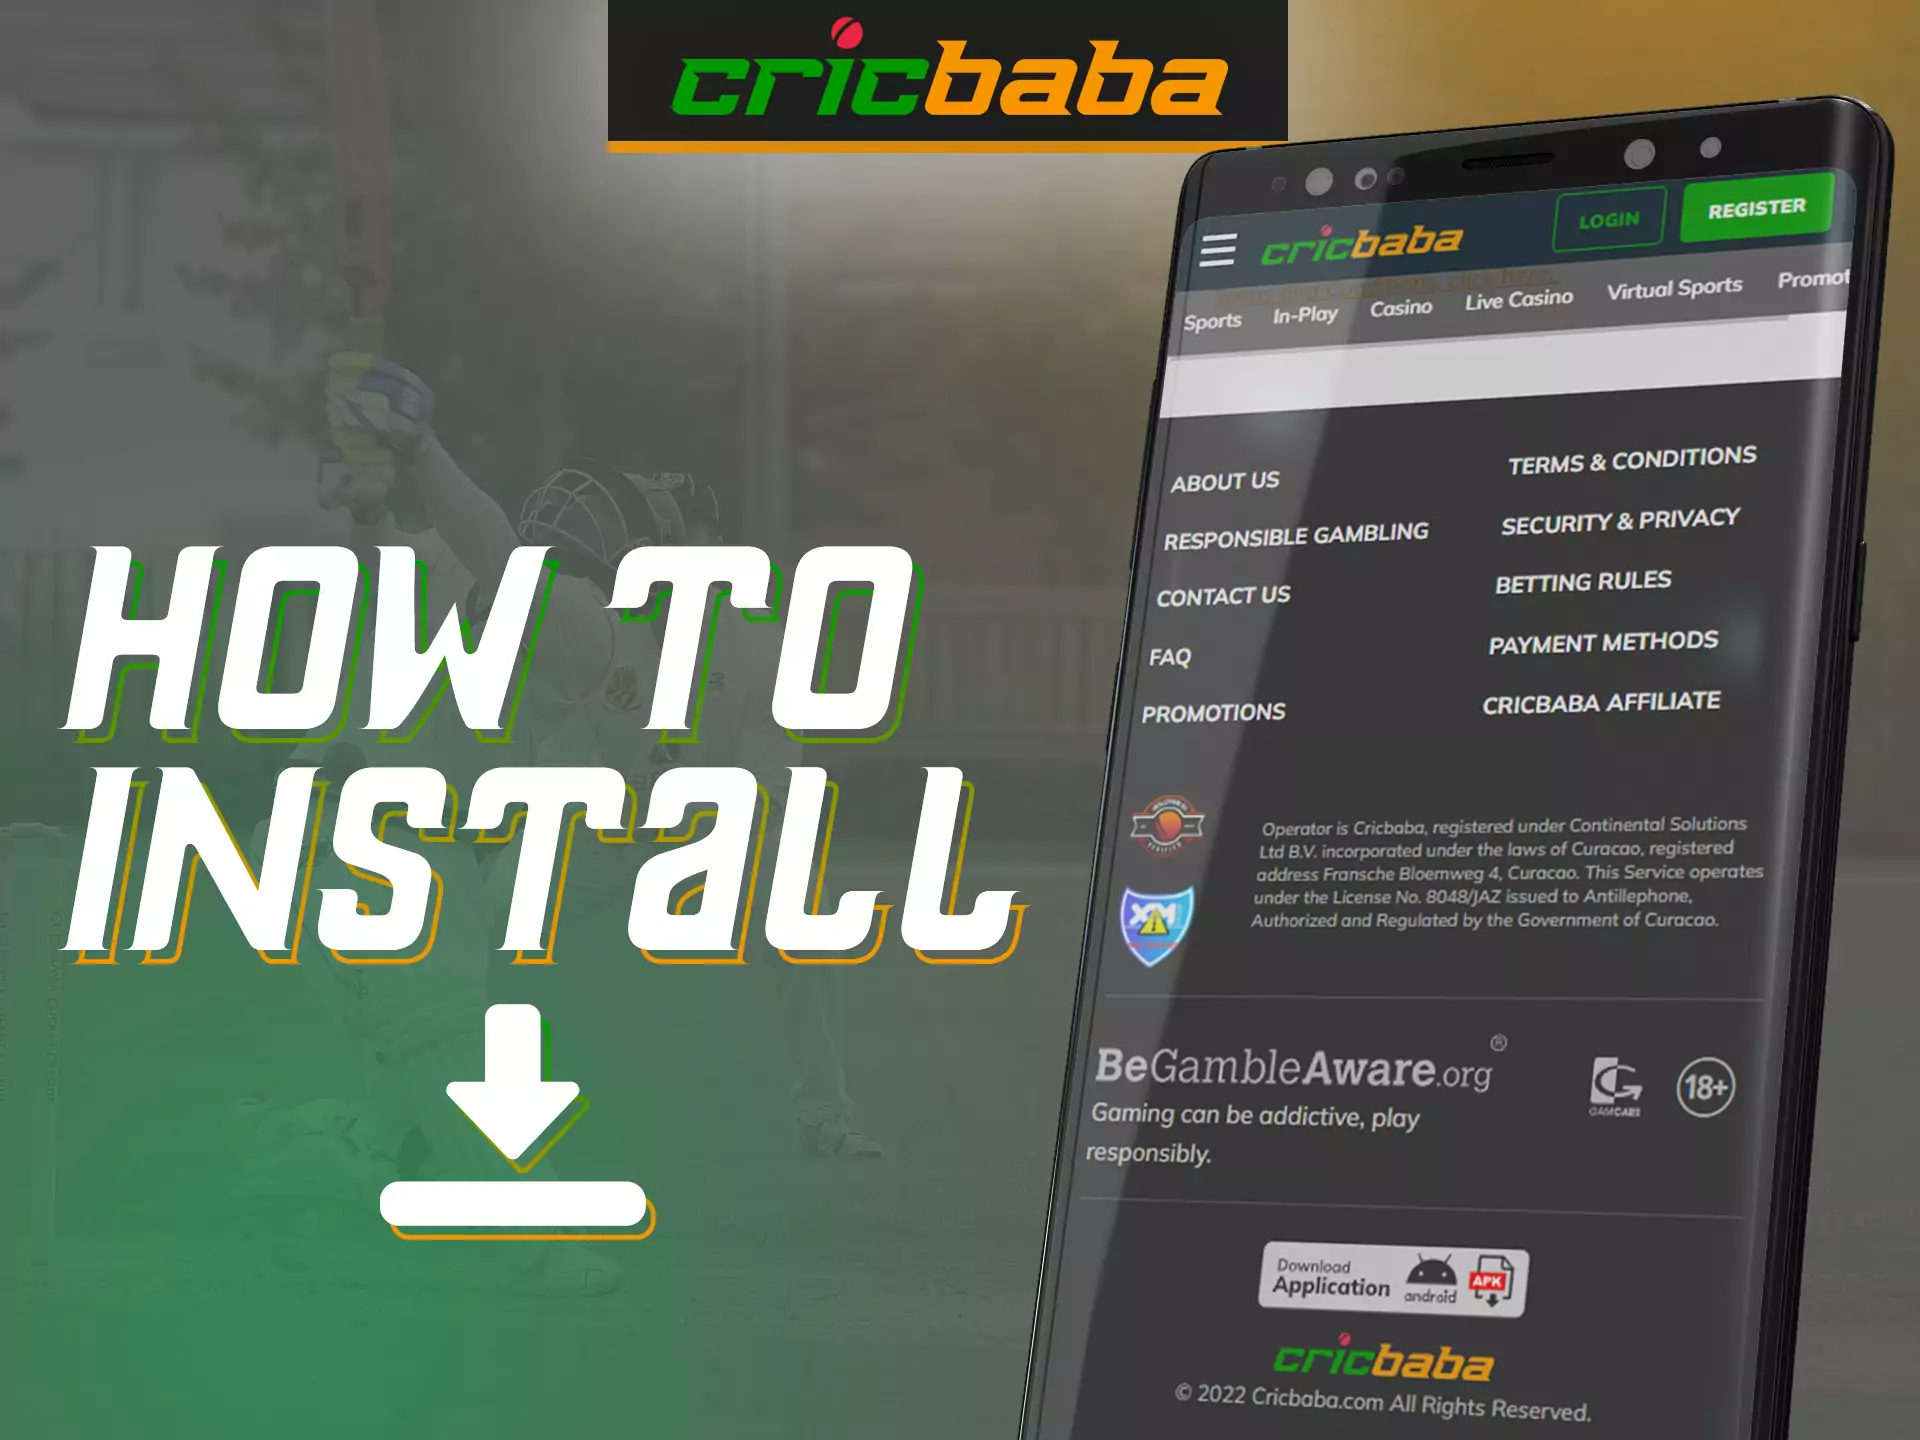 With this simple instruction, learn how to bet on Cricbaba.